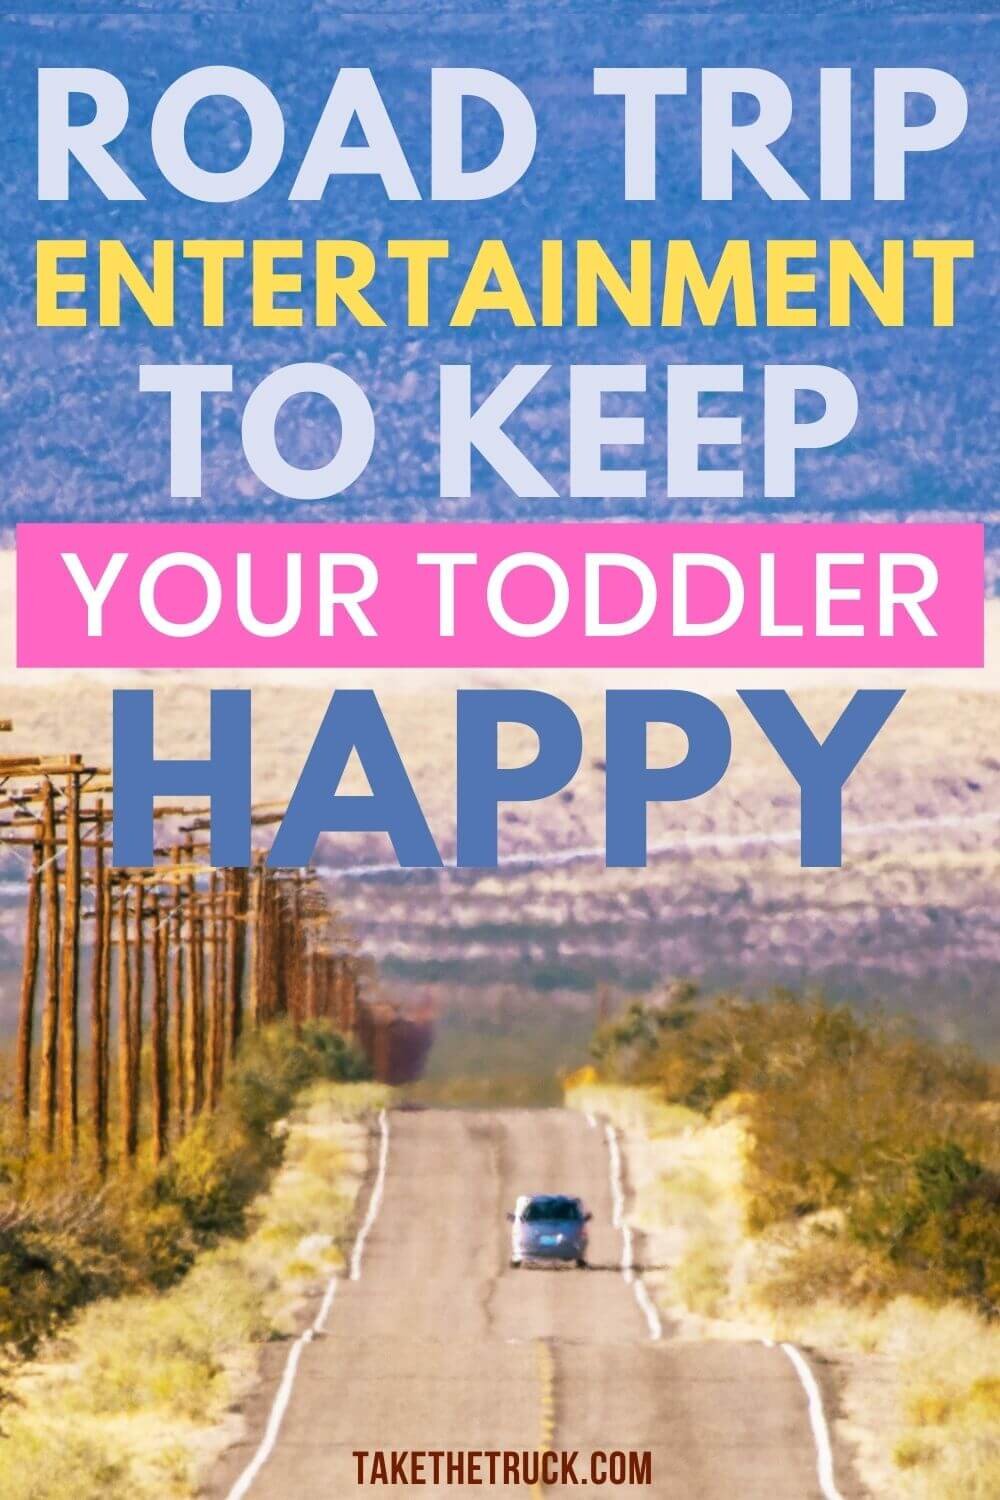 This post is full of awesome road trip activities for toddlers, whether you’re looking for DIY road trip activities or for the best travel toys to purchase as road trip entertainment for your toddler.